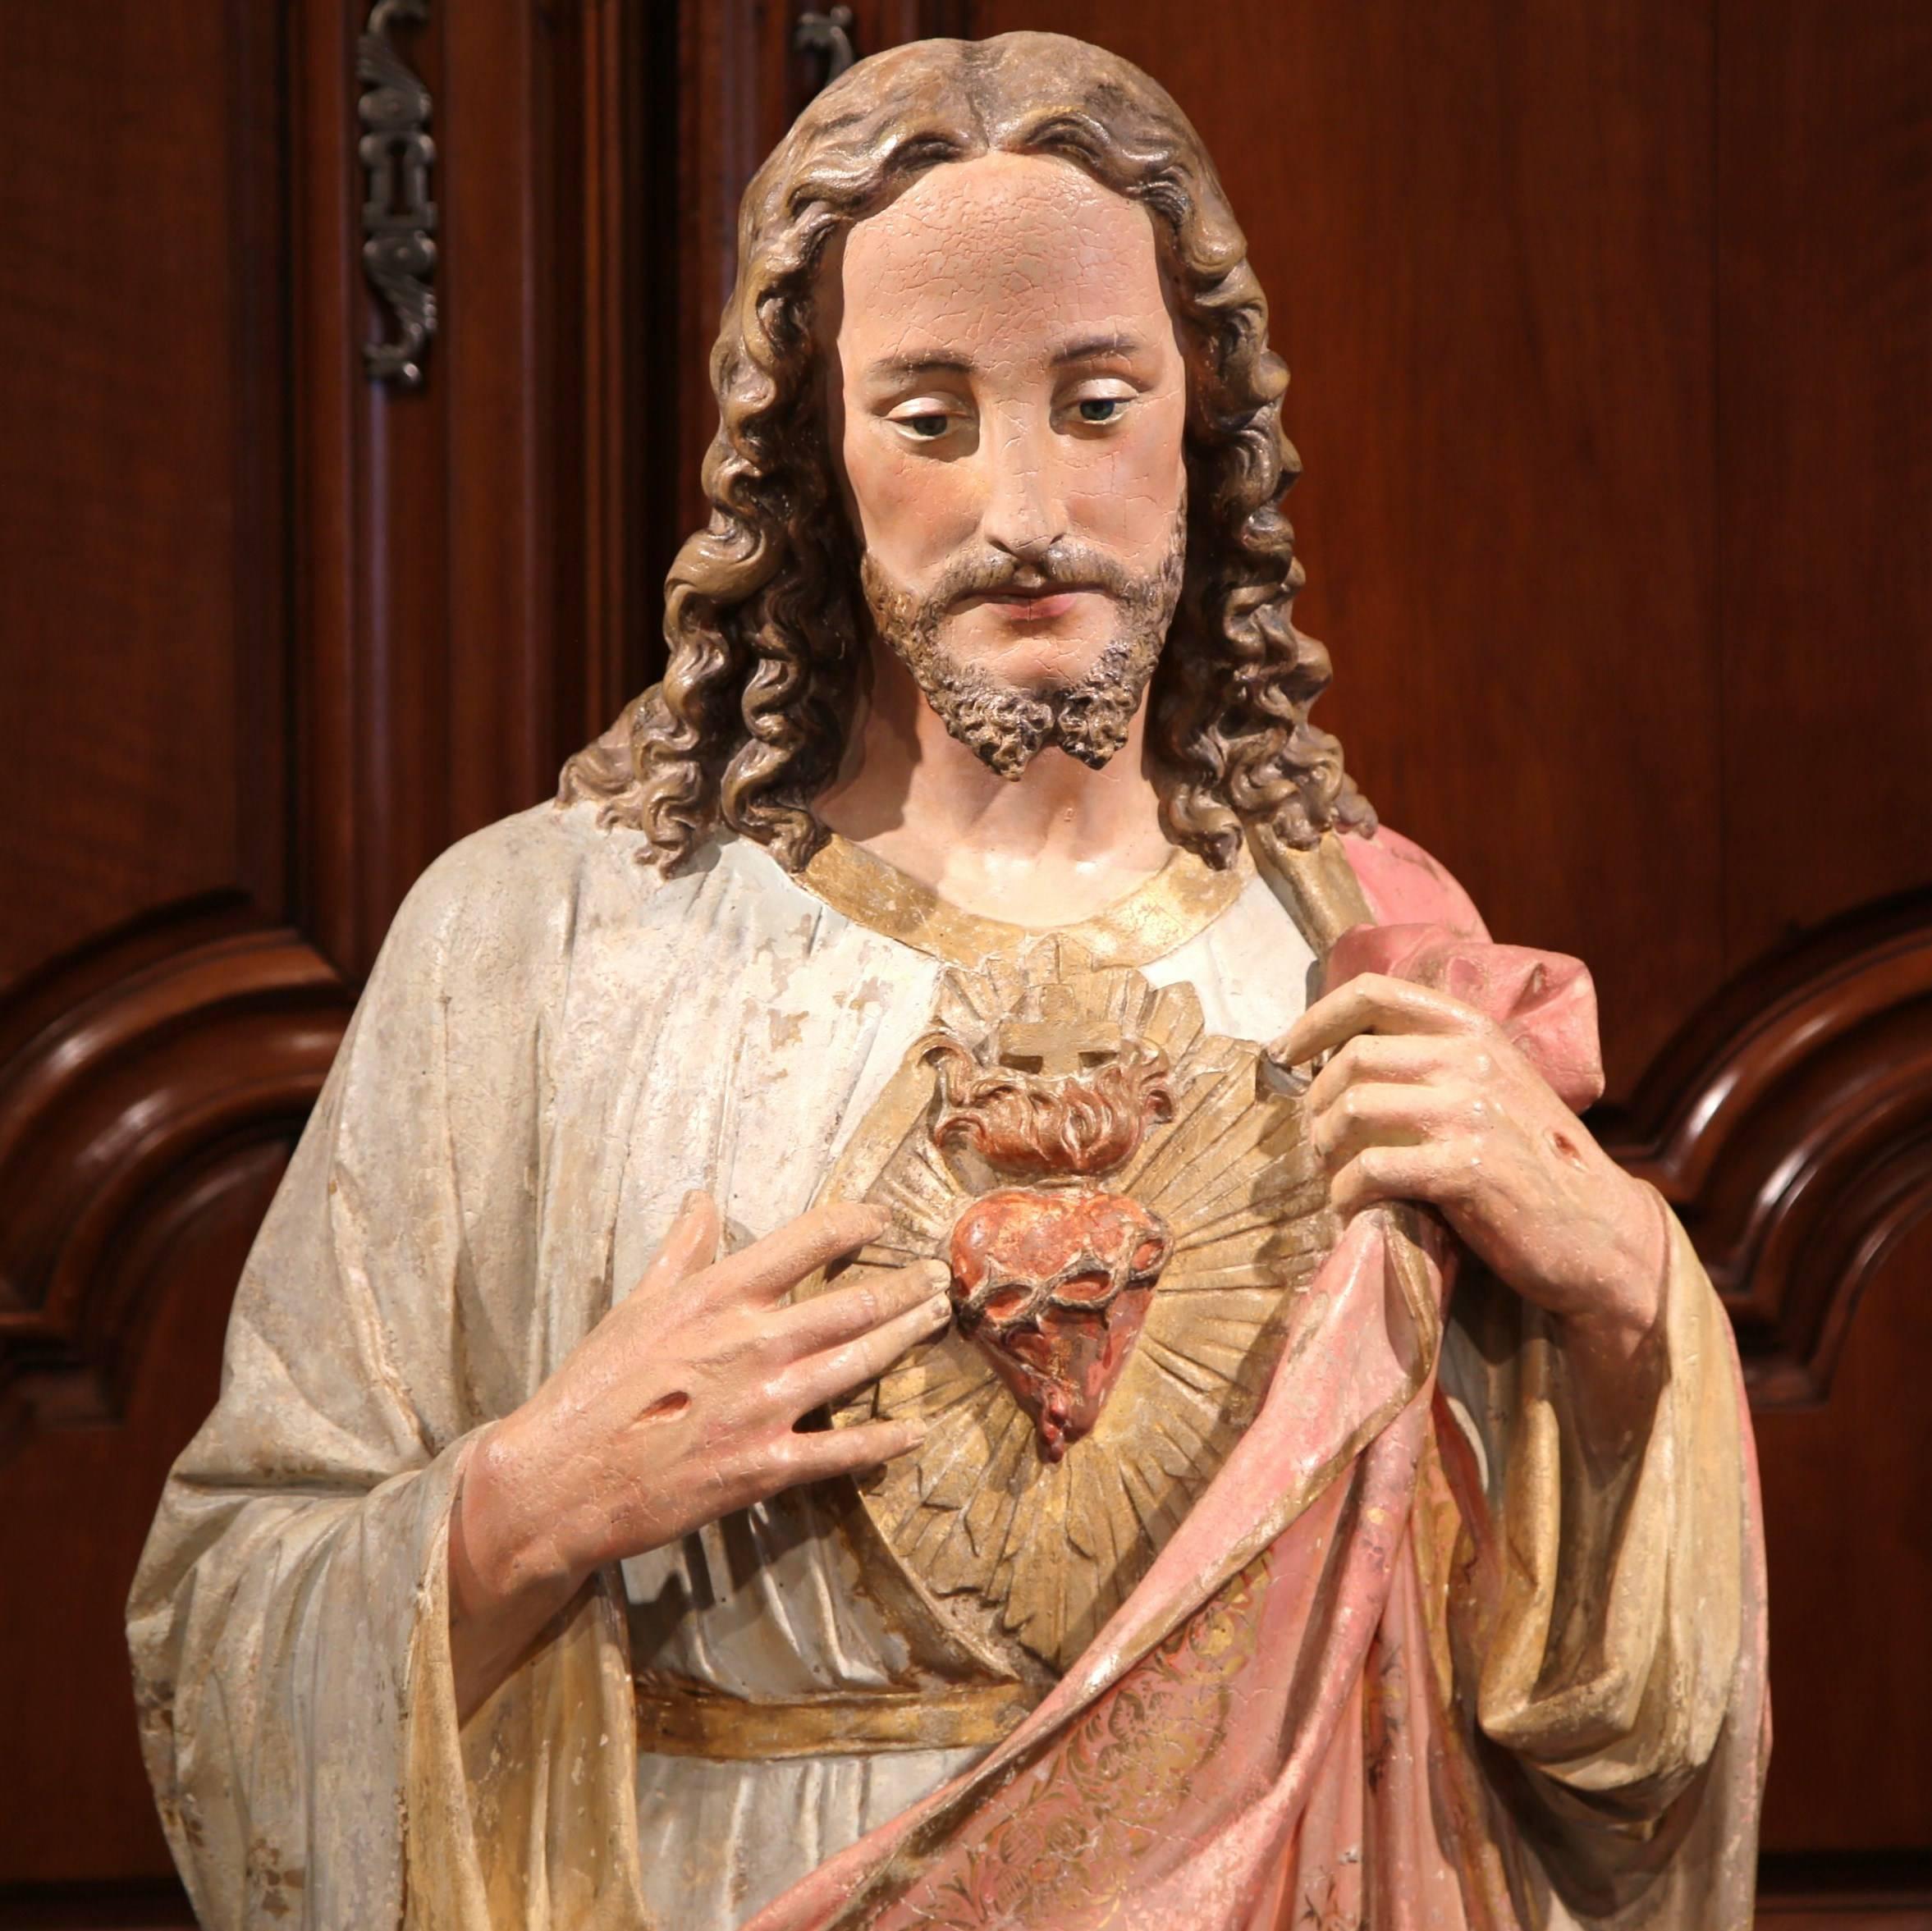 This beautiful, statue of Christ was crafted in Provence, Southern France, circa 1860. The life-size, ceramic sculpture features Jesus standing on a pedestal and showing his Sacred Heart. The large statue has its original painted finish, further